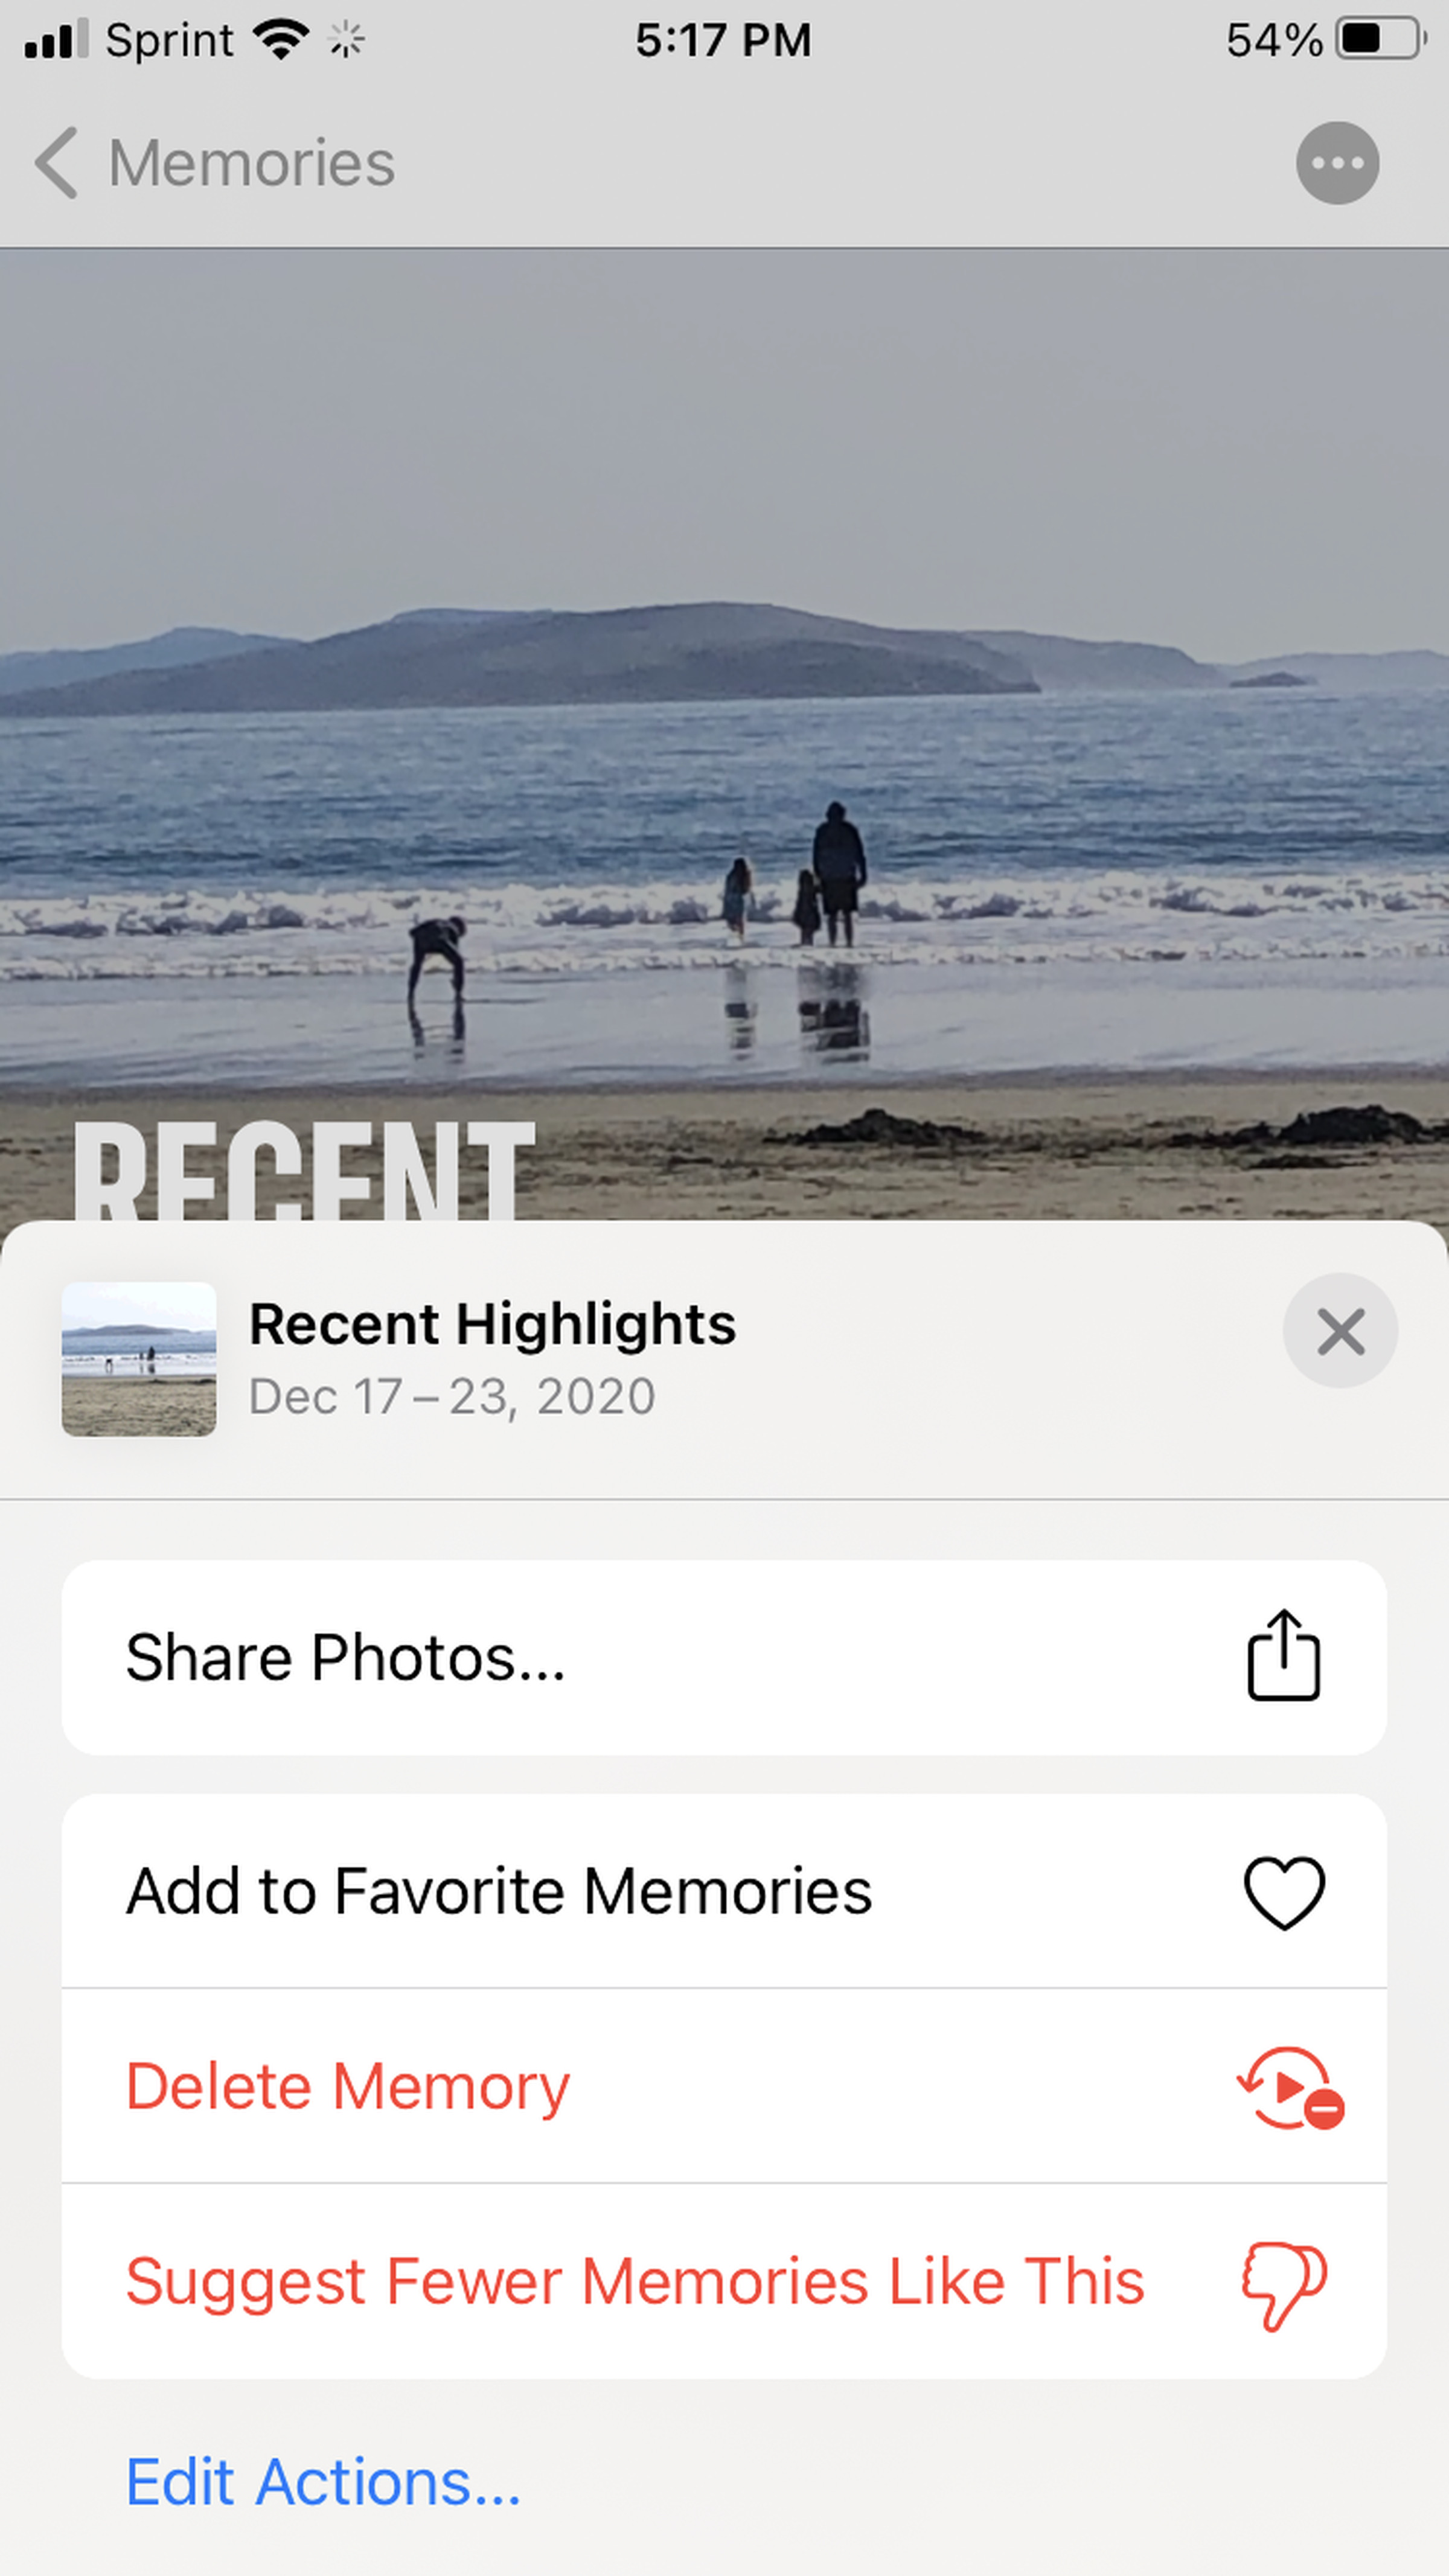 Long-press the photo and tap on “Suggest Fewer Memories Like This.”